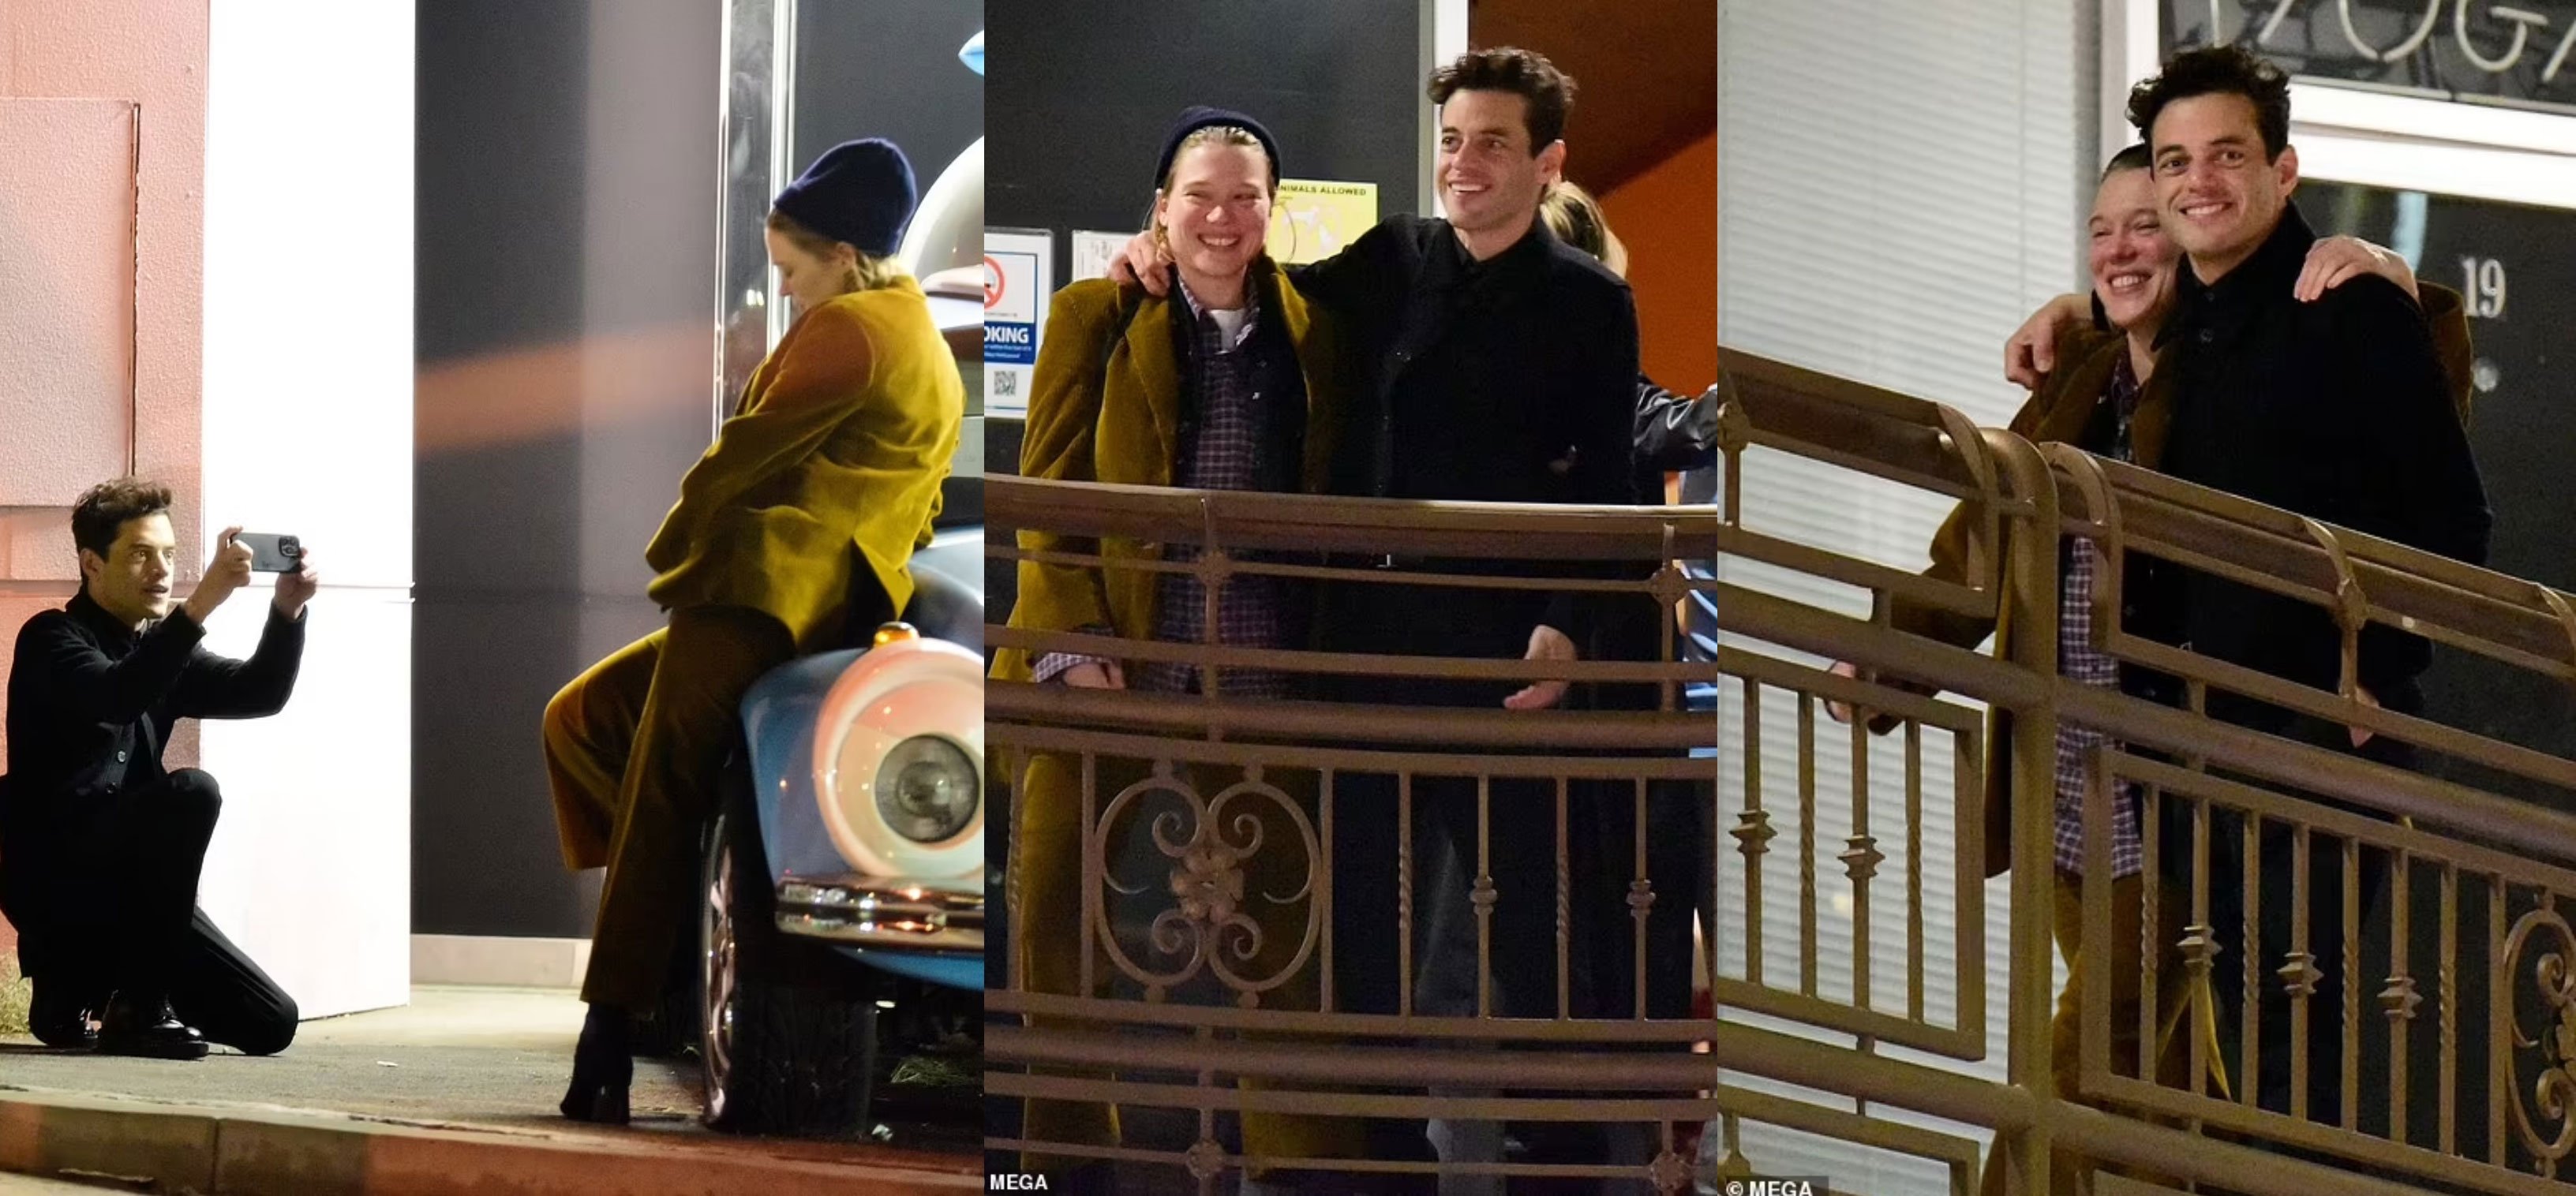 Rami Malek and Lea Seydoux spotted snuggling up after intimate sushi dinner